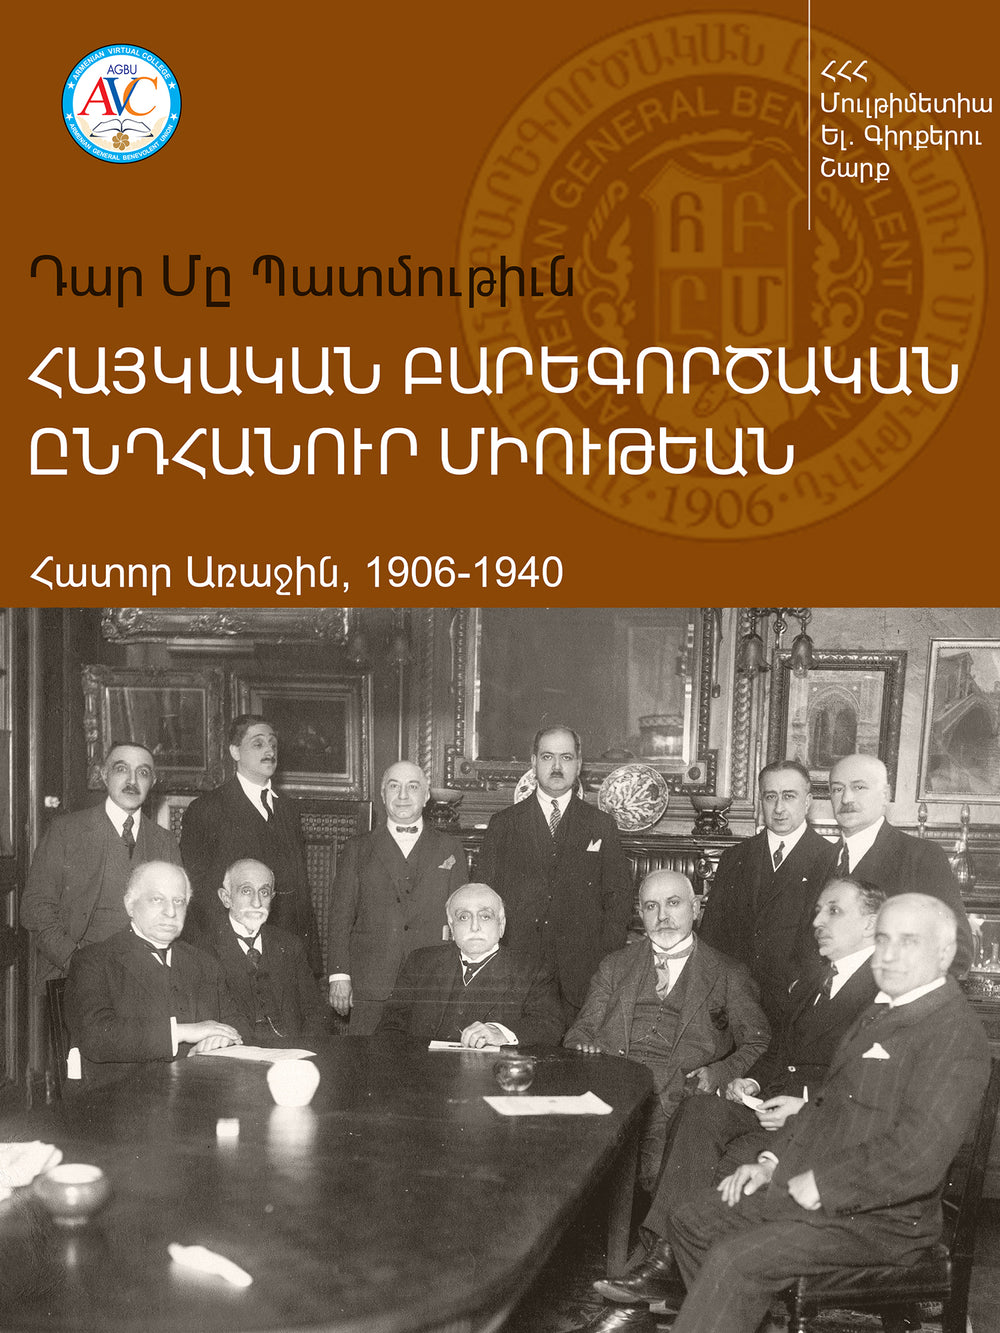 The Armenian General Benevolent Union: One Hundred Years of History (Vol. I: 1906-1940)